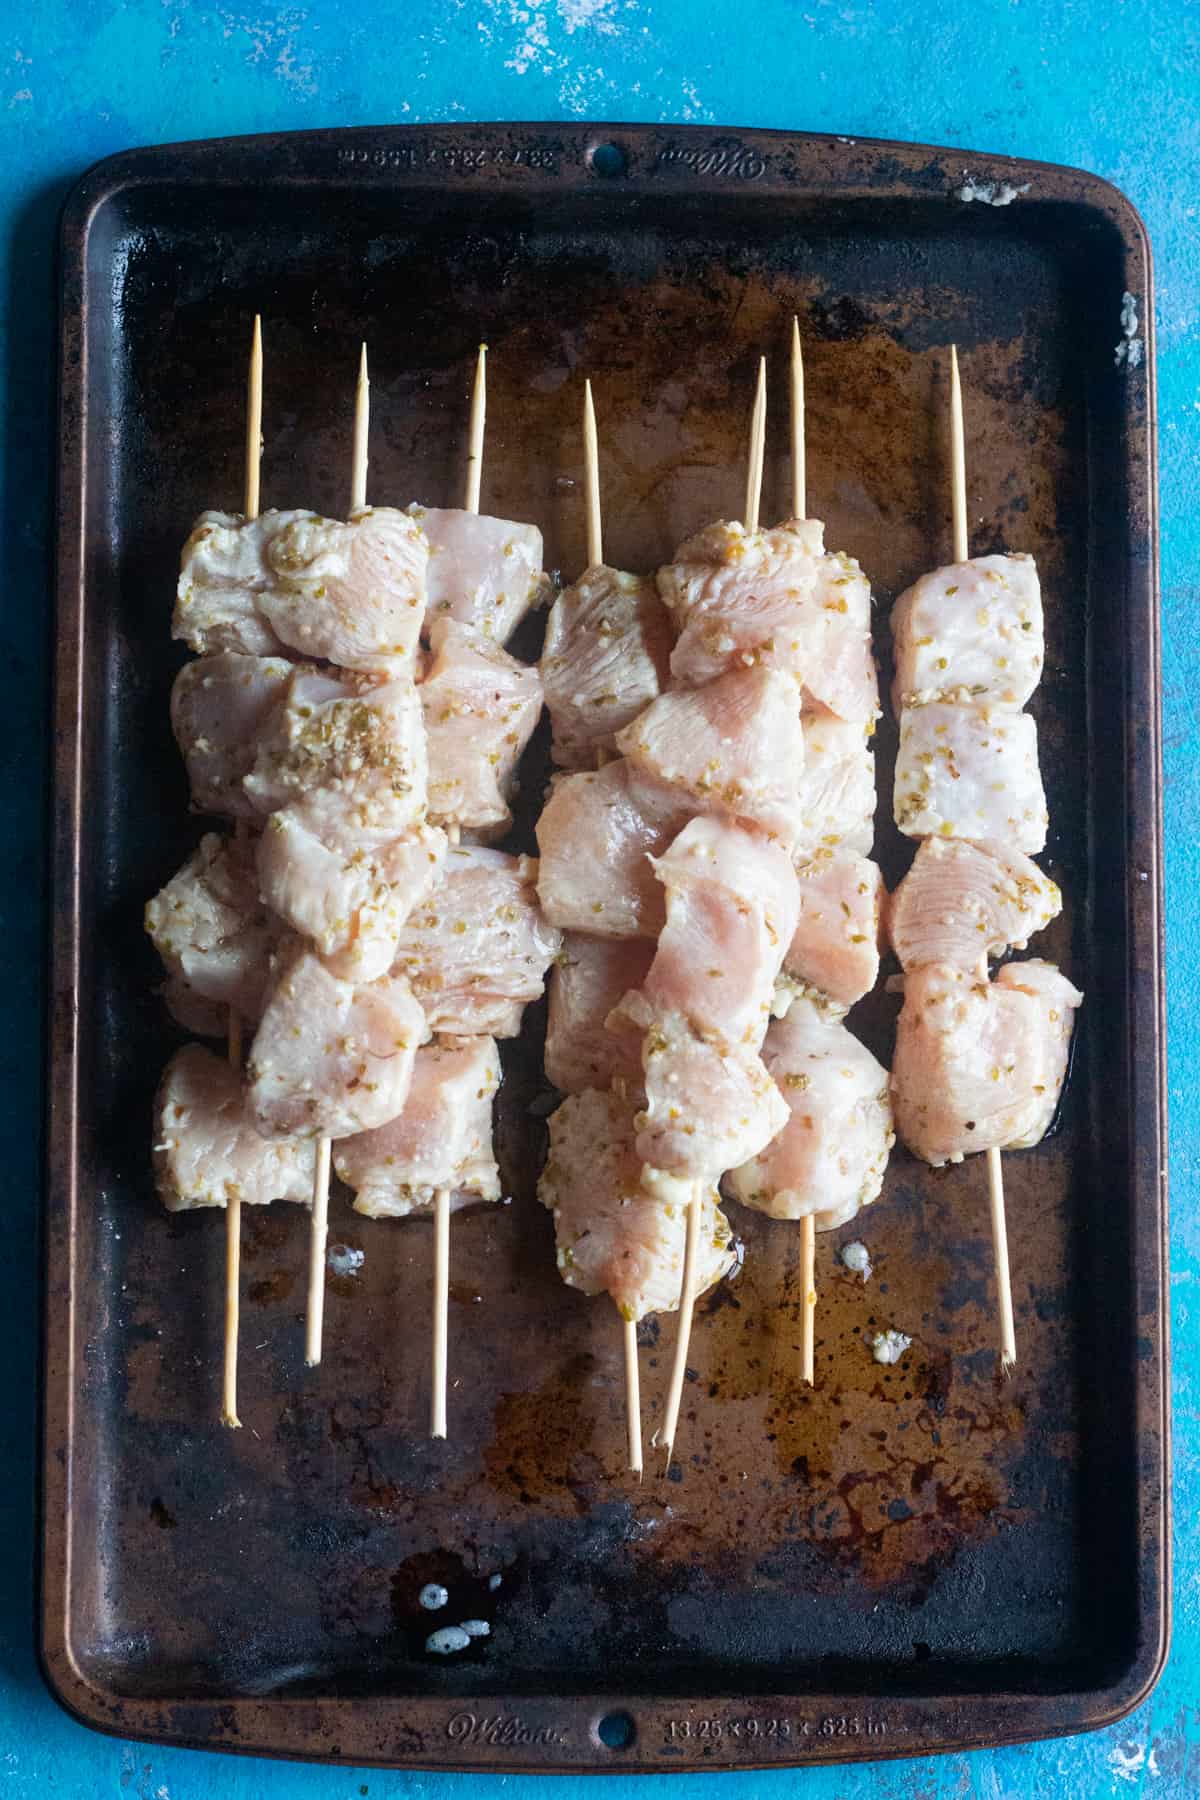 cut chicken into bite size pieces and mix it with olive oil lemon juice and spices. Marinade for at least one hour. 